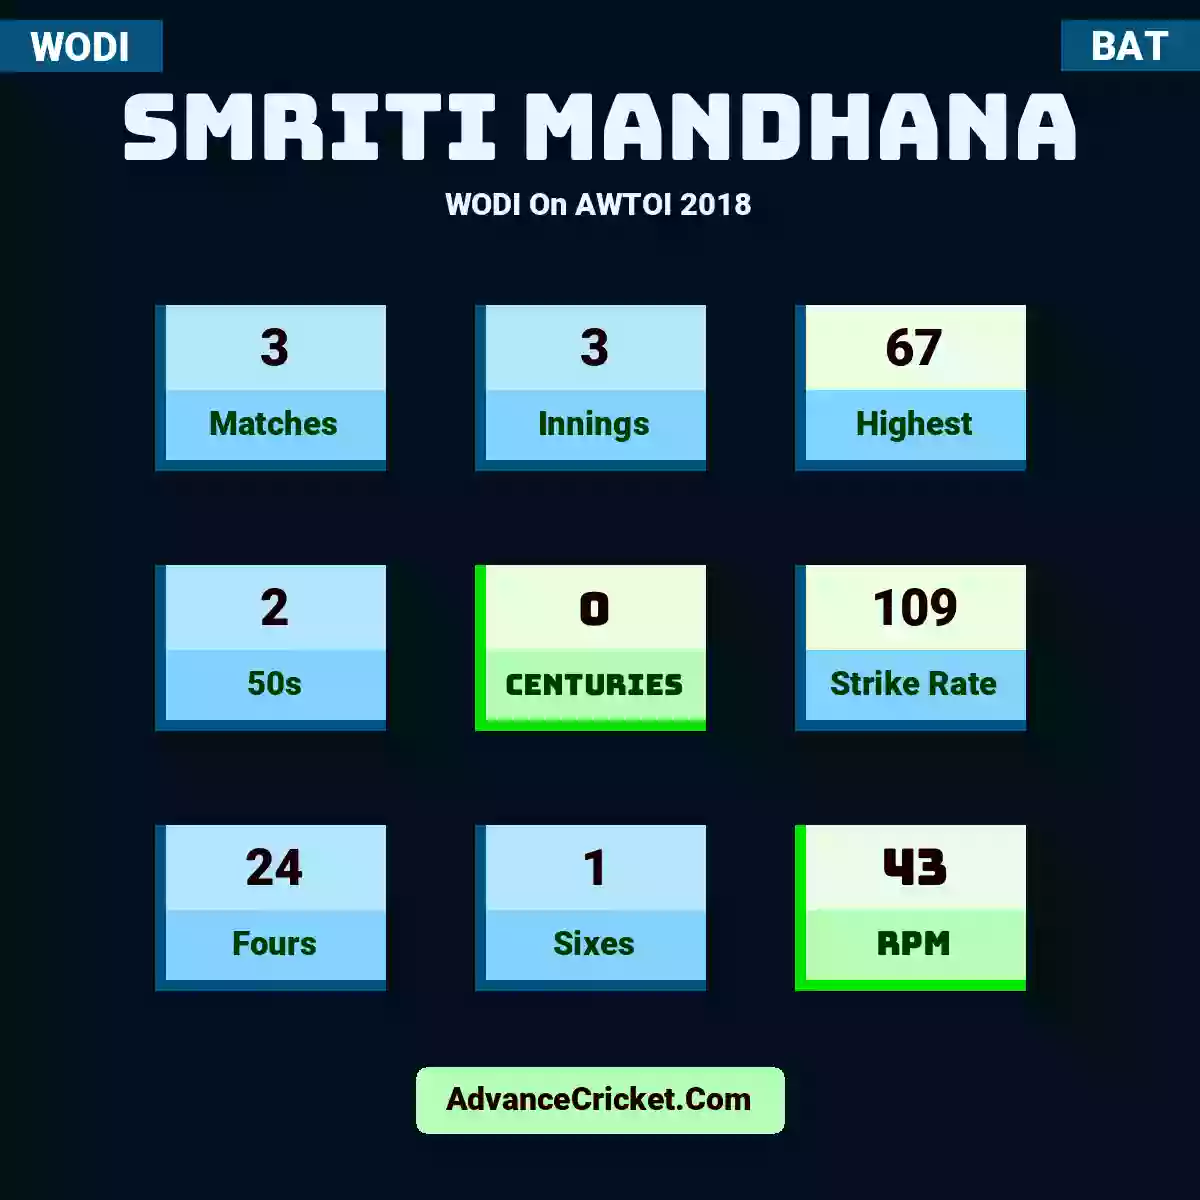 Smriti Mandhana WODI  On AWTOI 2018, Smriti Mandhana played 3 matches, scored 67 runs as highest, 2 half-centuries, and 0 centuries, with a strike rate of 109. S.Mandhana hit 24 fours and 1 sixes, with an RPM of 43.